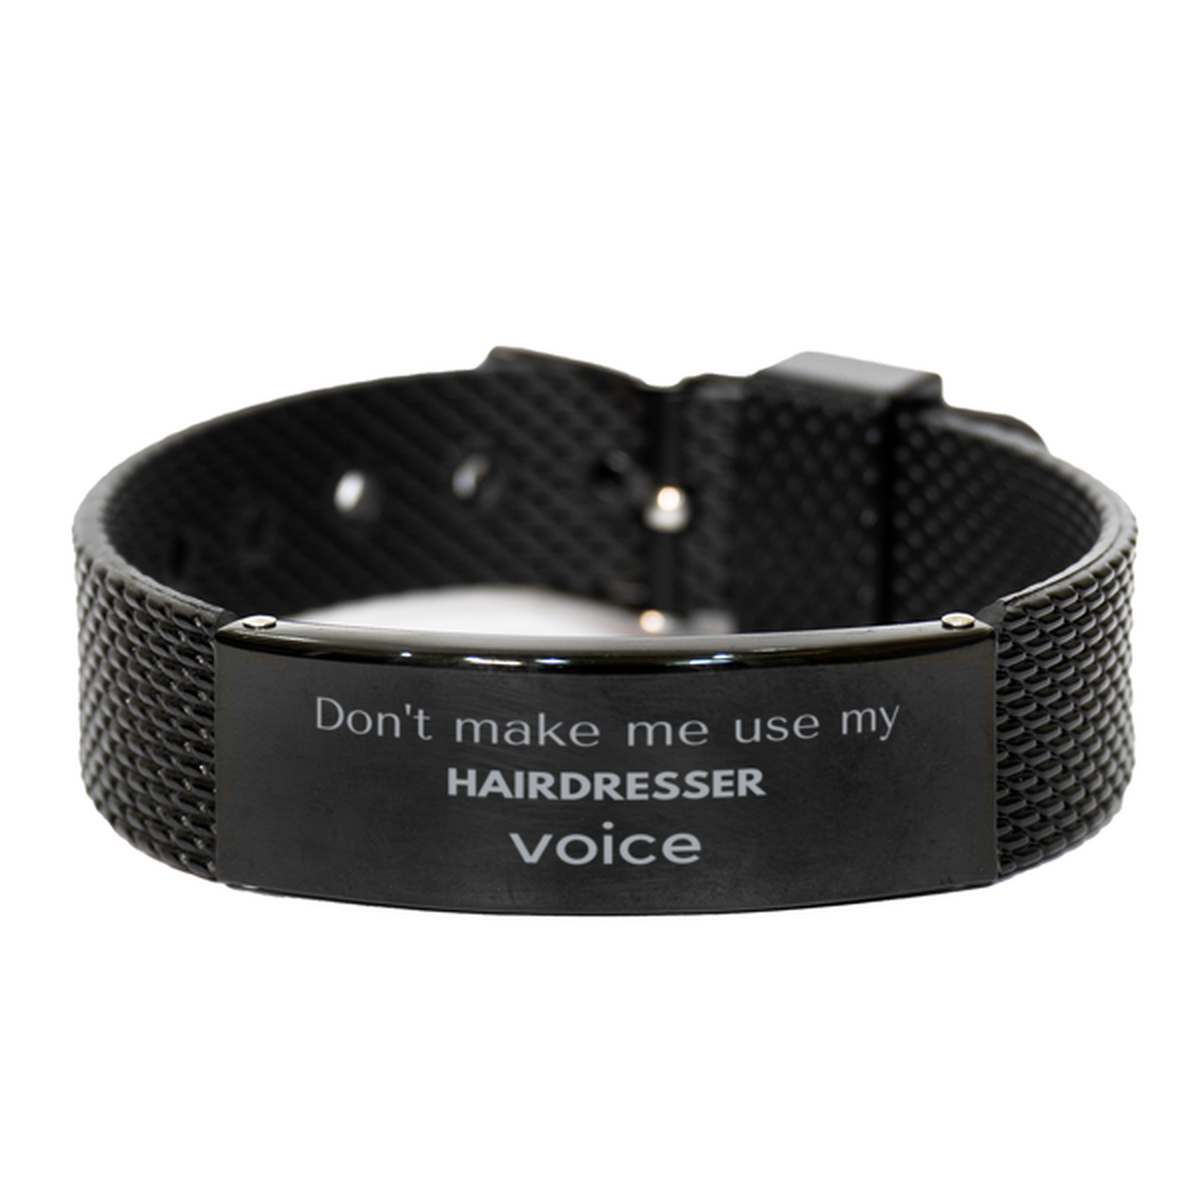 Don't make me use my Hairdresser voice, Sarcasm Hairdresser Gifts, Christmas Hairdresser Black Shark Mesh Bracelet Birthday Unique Gifts For Hairdresser Coworkers, Men, Women, Colleague, Friends